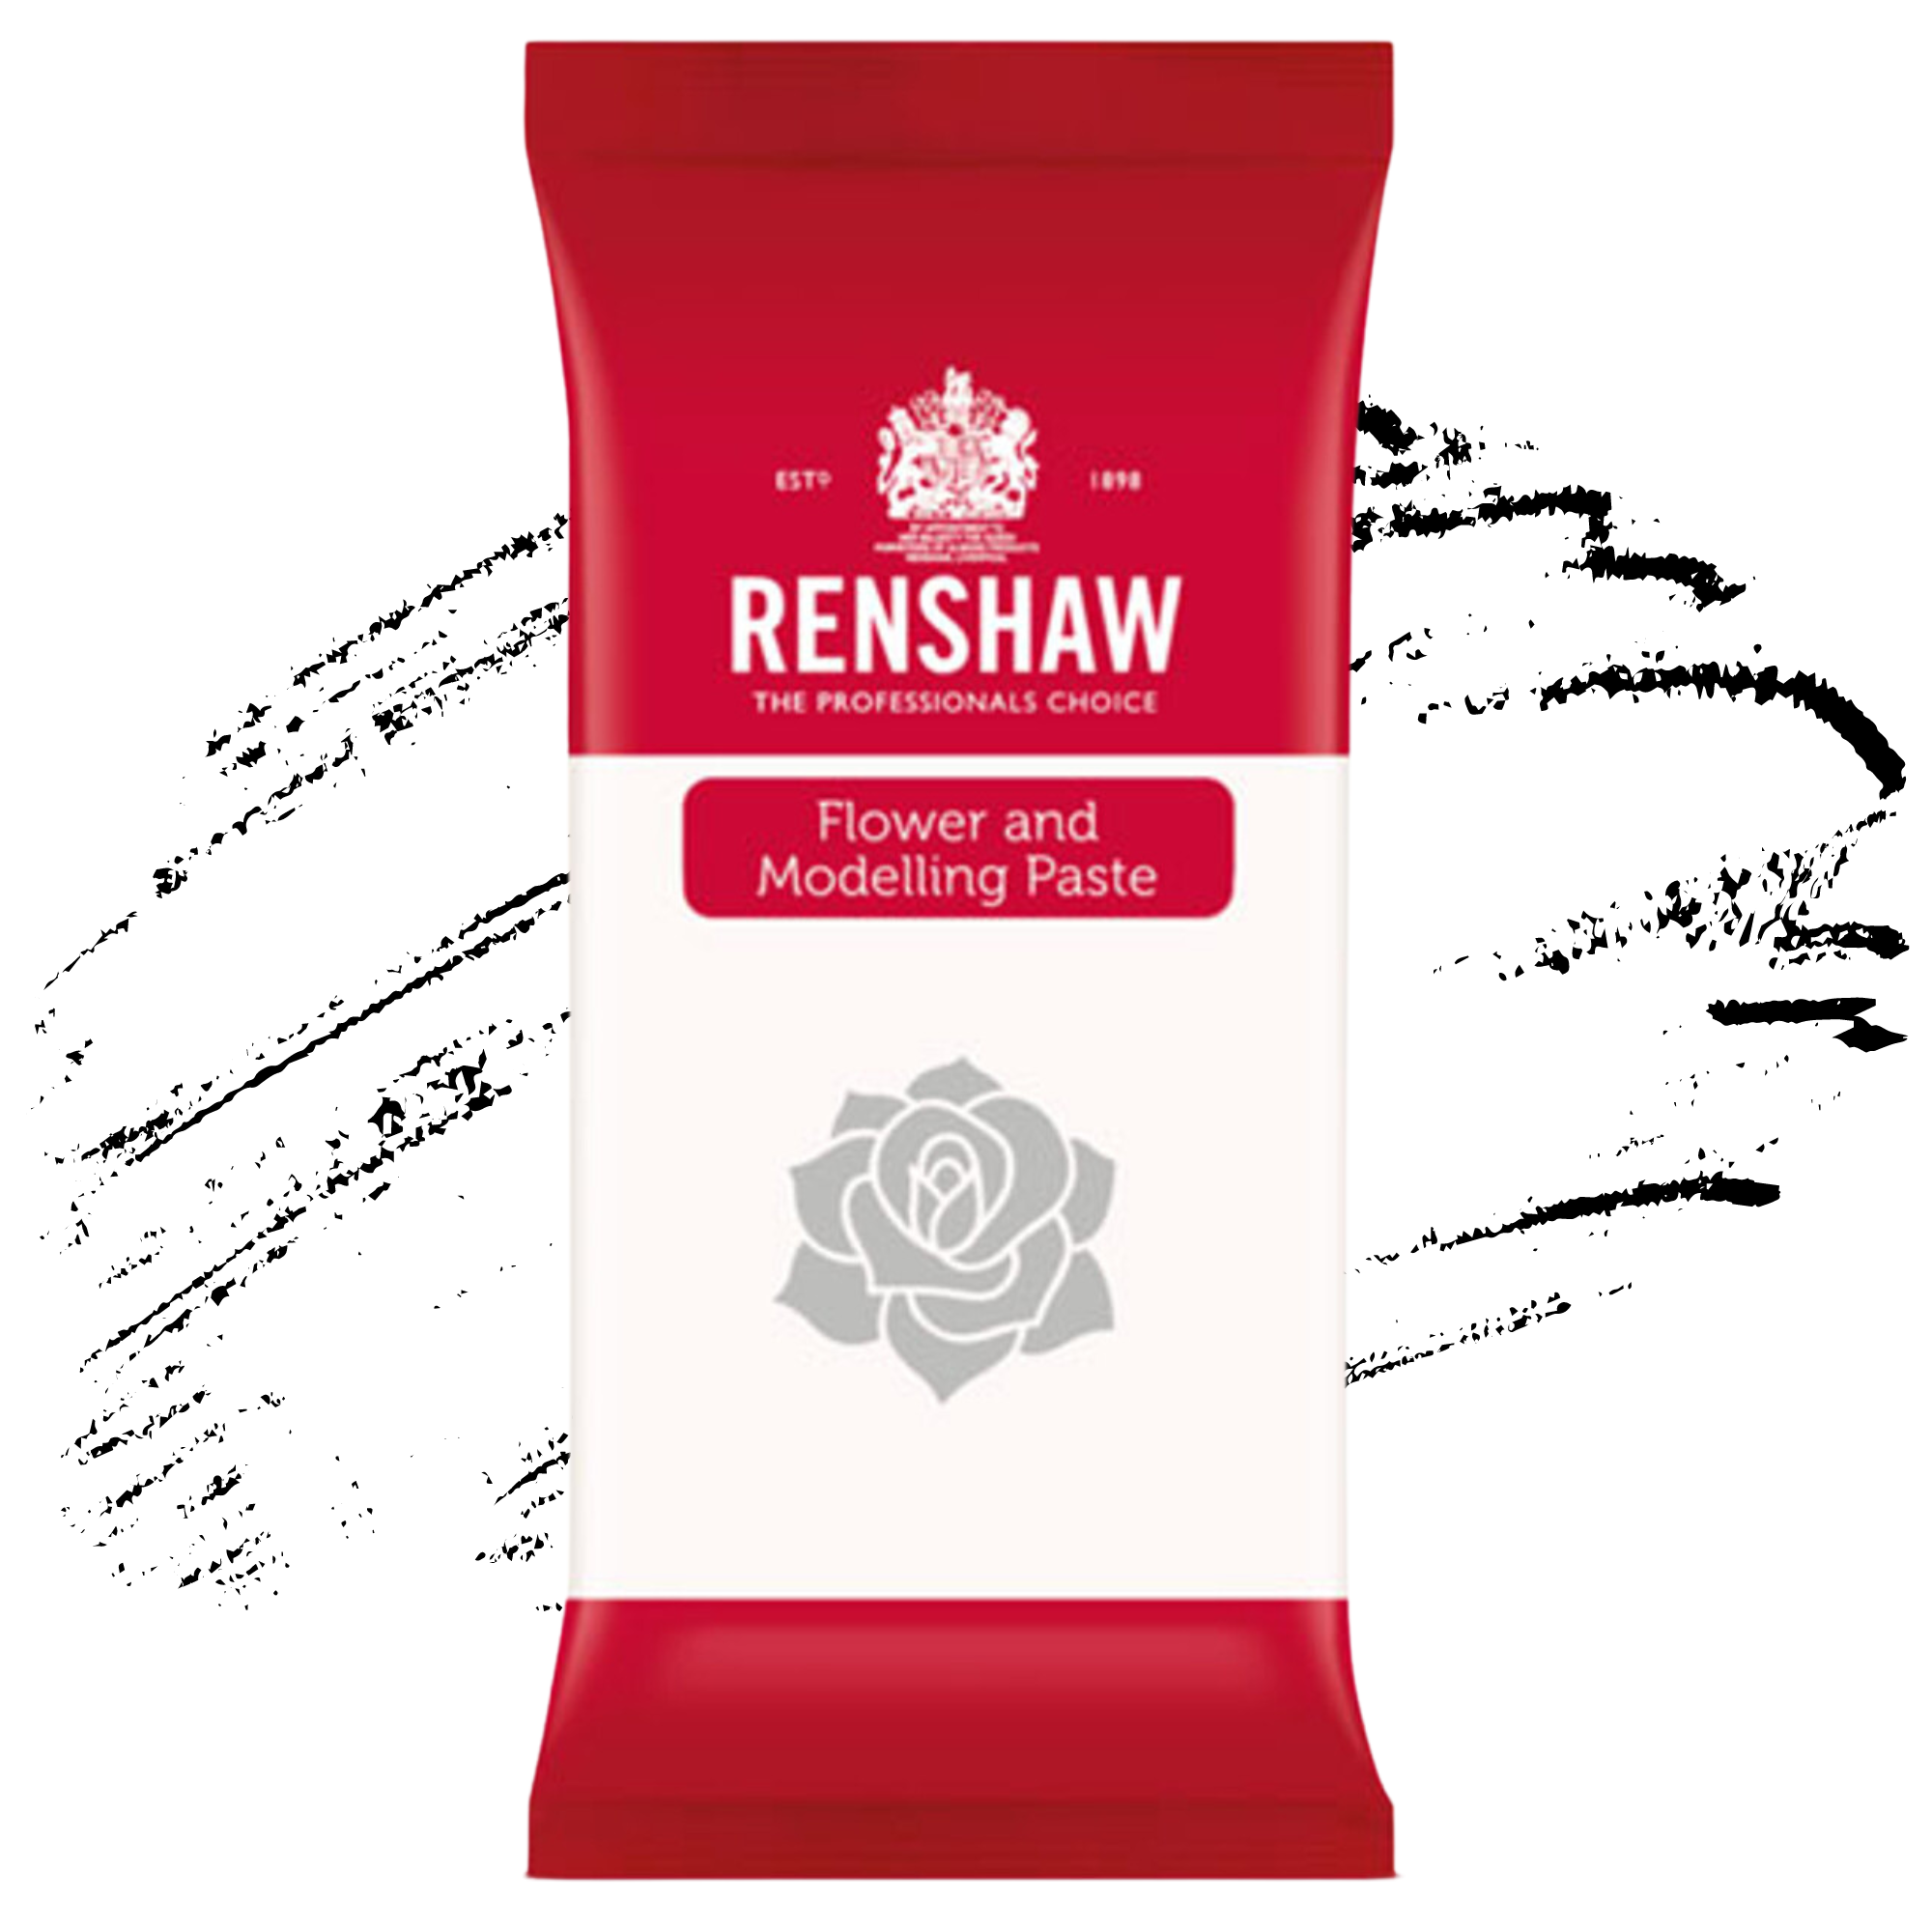 Renshaw Professional Flower and Modelling Paste - Whitw - 250g